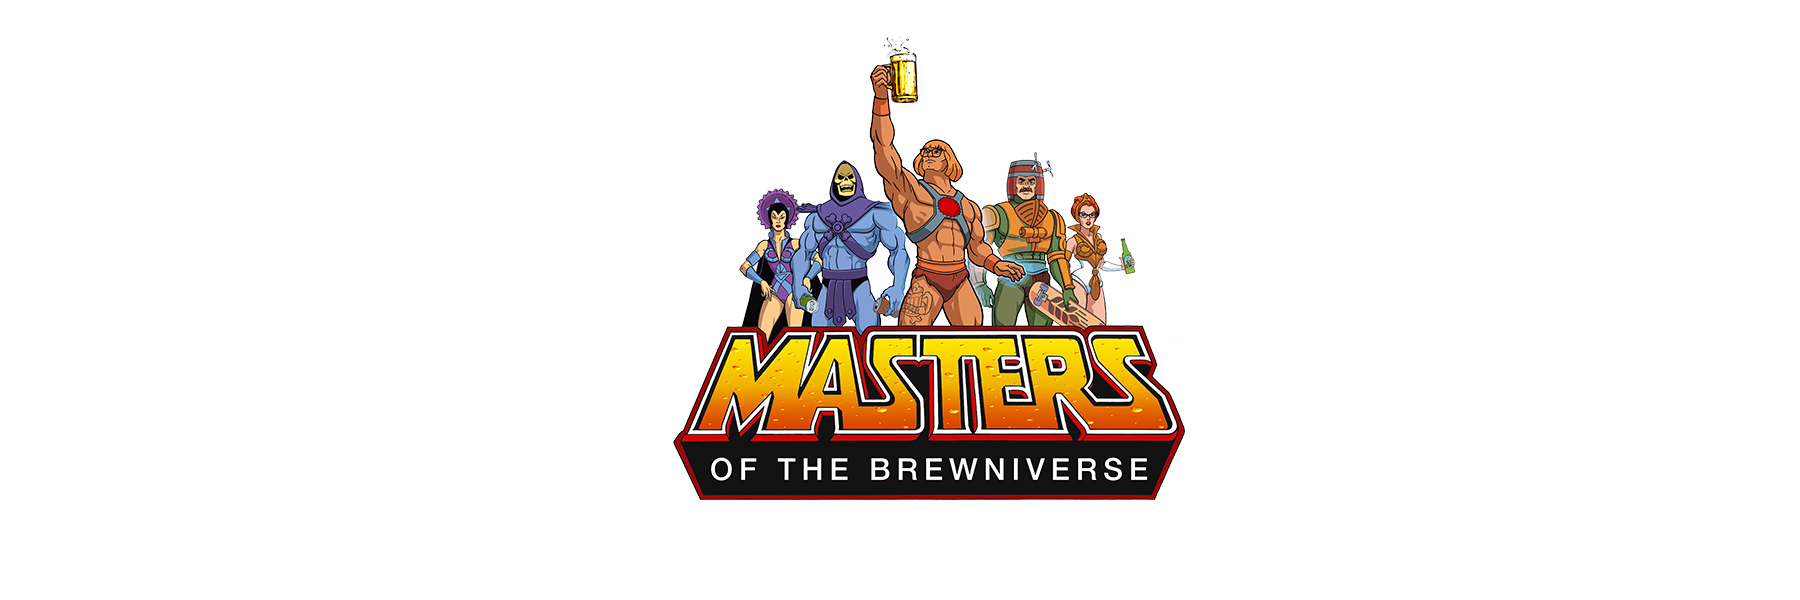 Masters of the Brewniverse